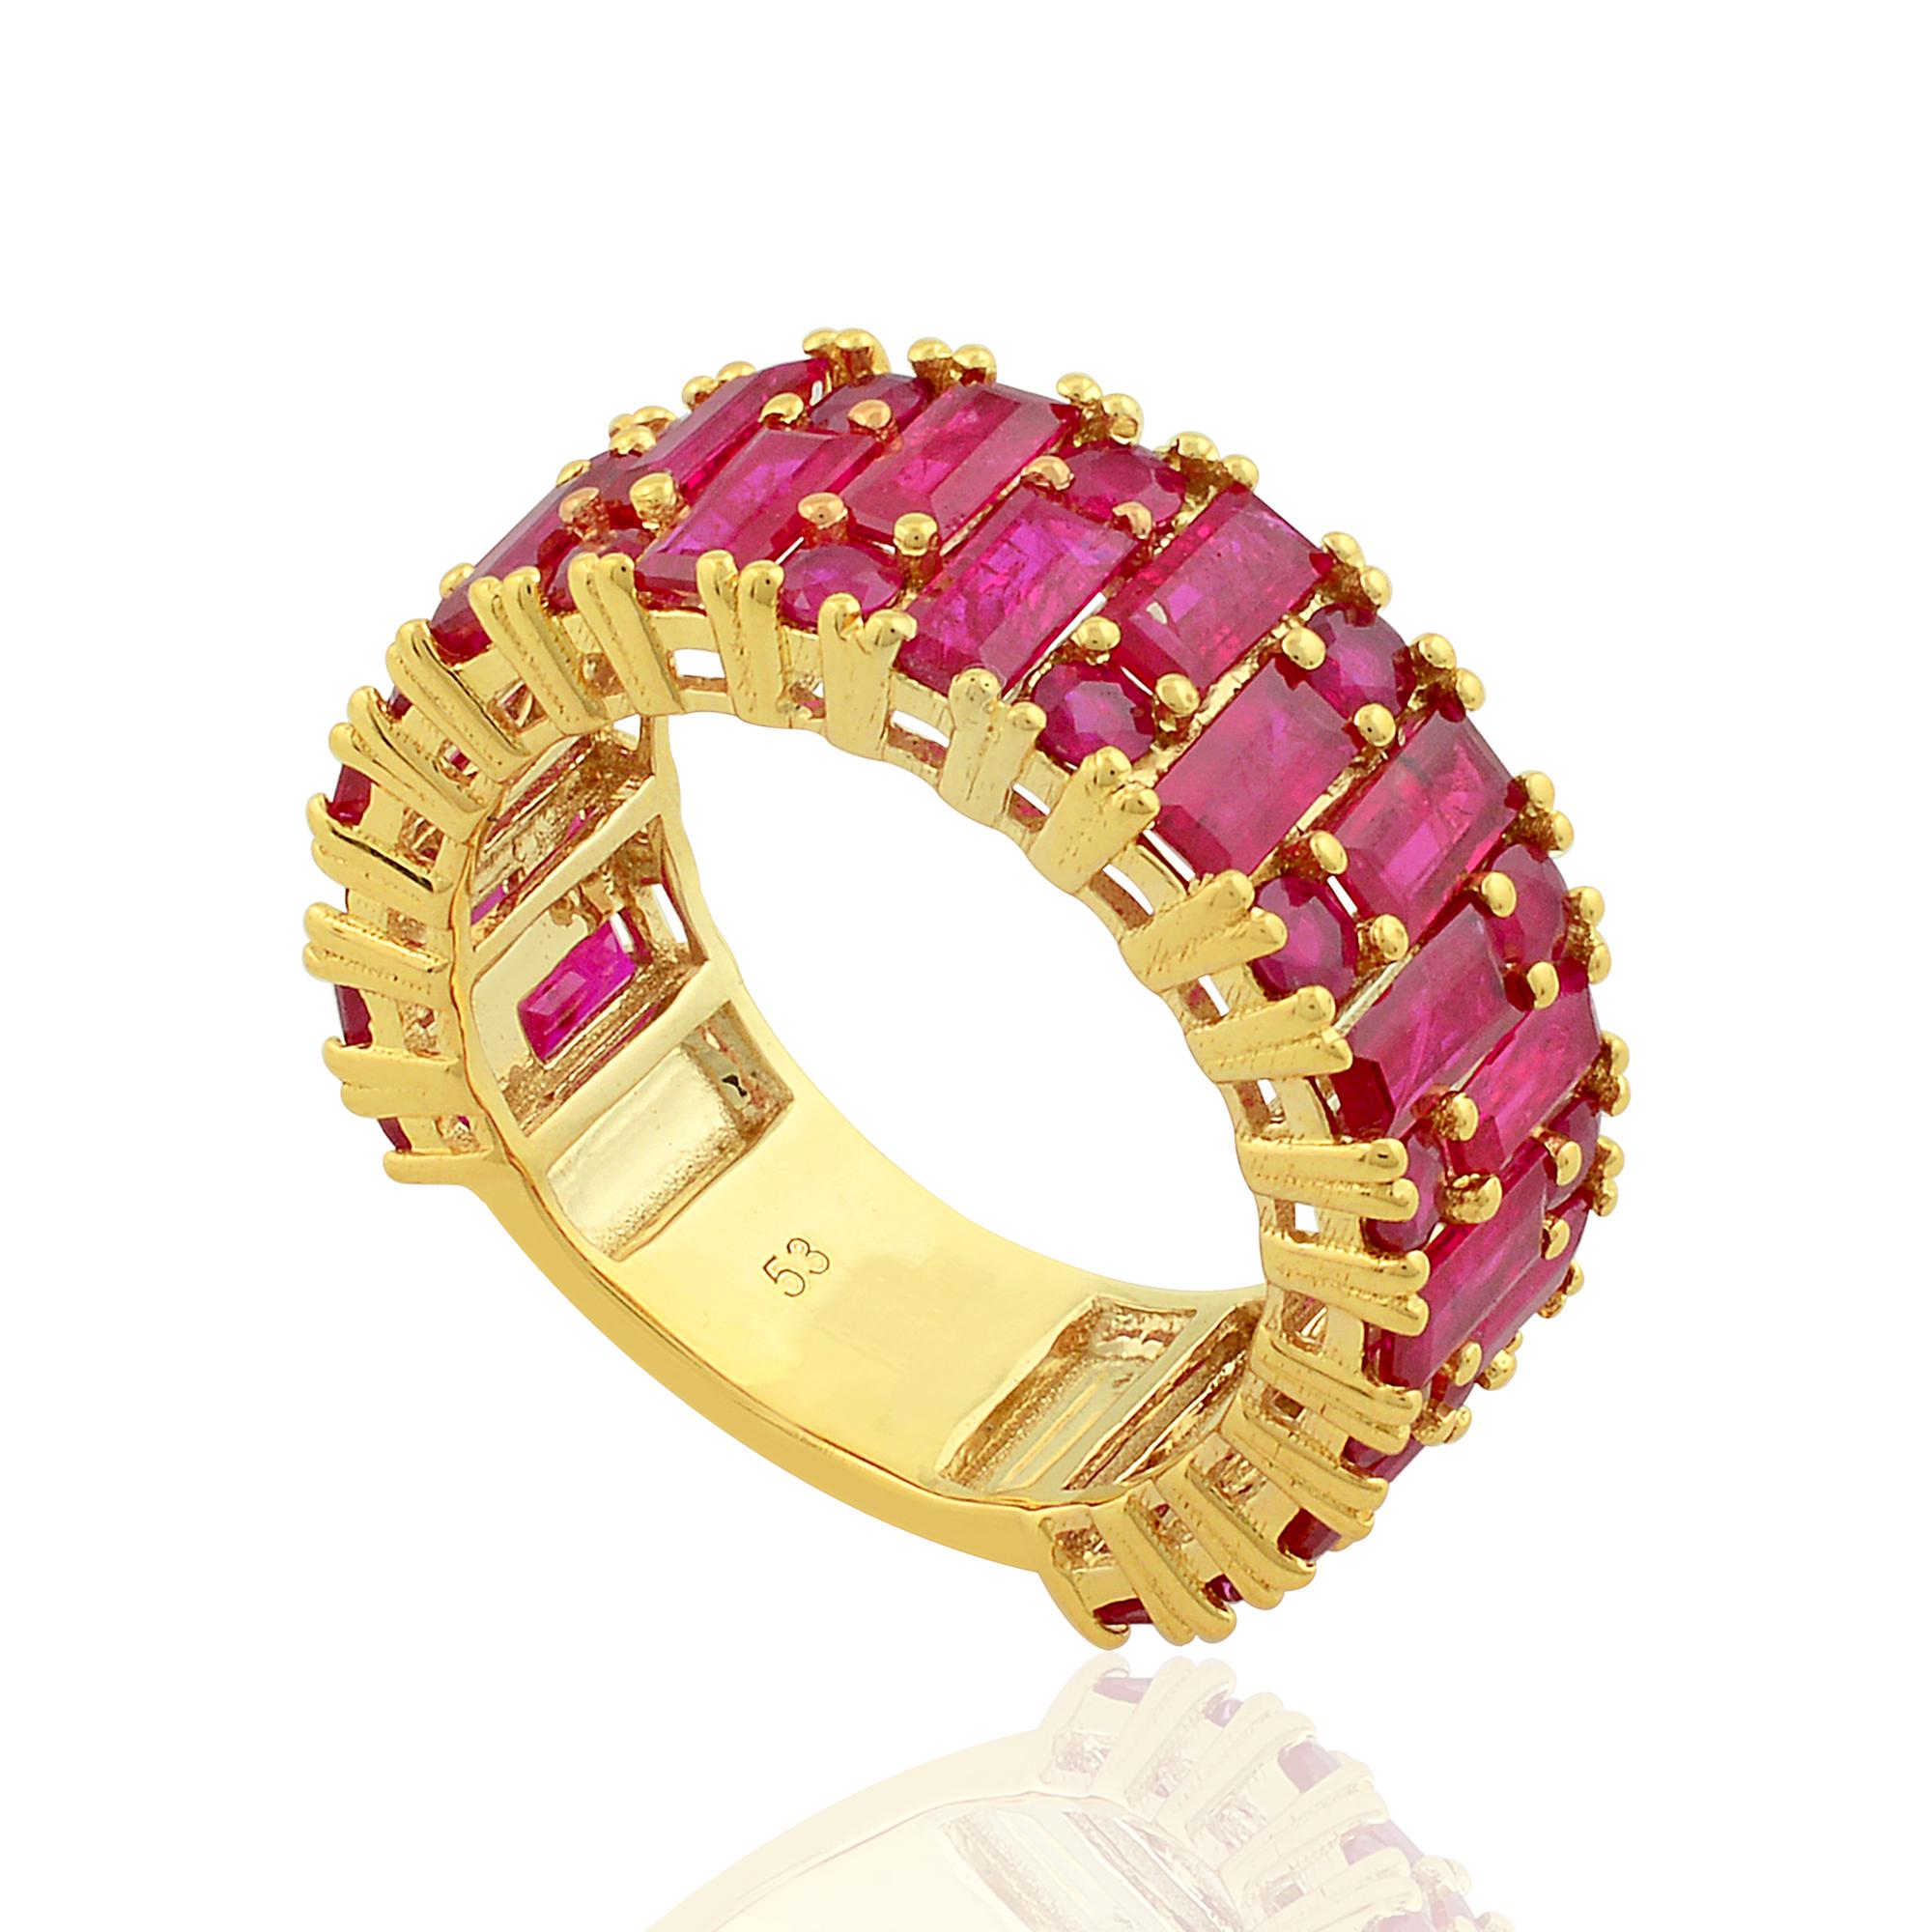 Women's 5.76 Carat Ruby Gemstone Band Ring Solid 14k Yellow Gold Handmade Fine Jewelry For Sale